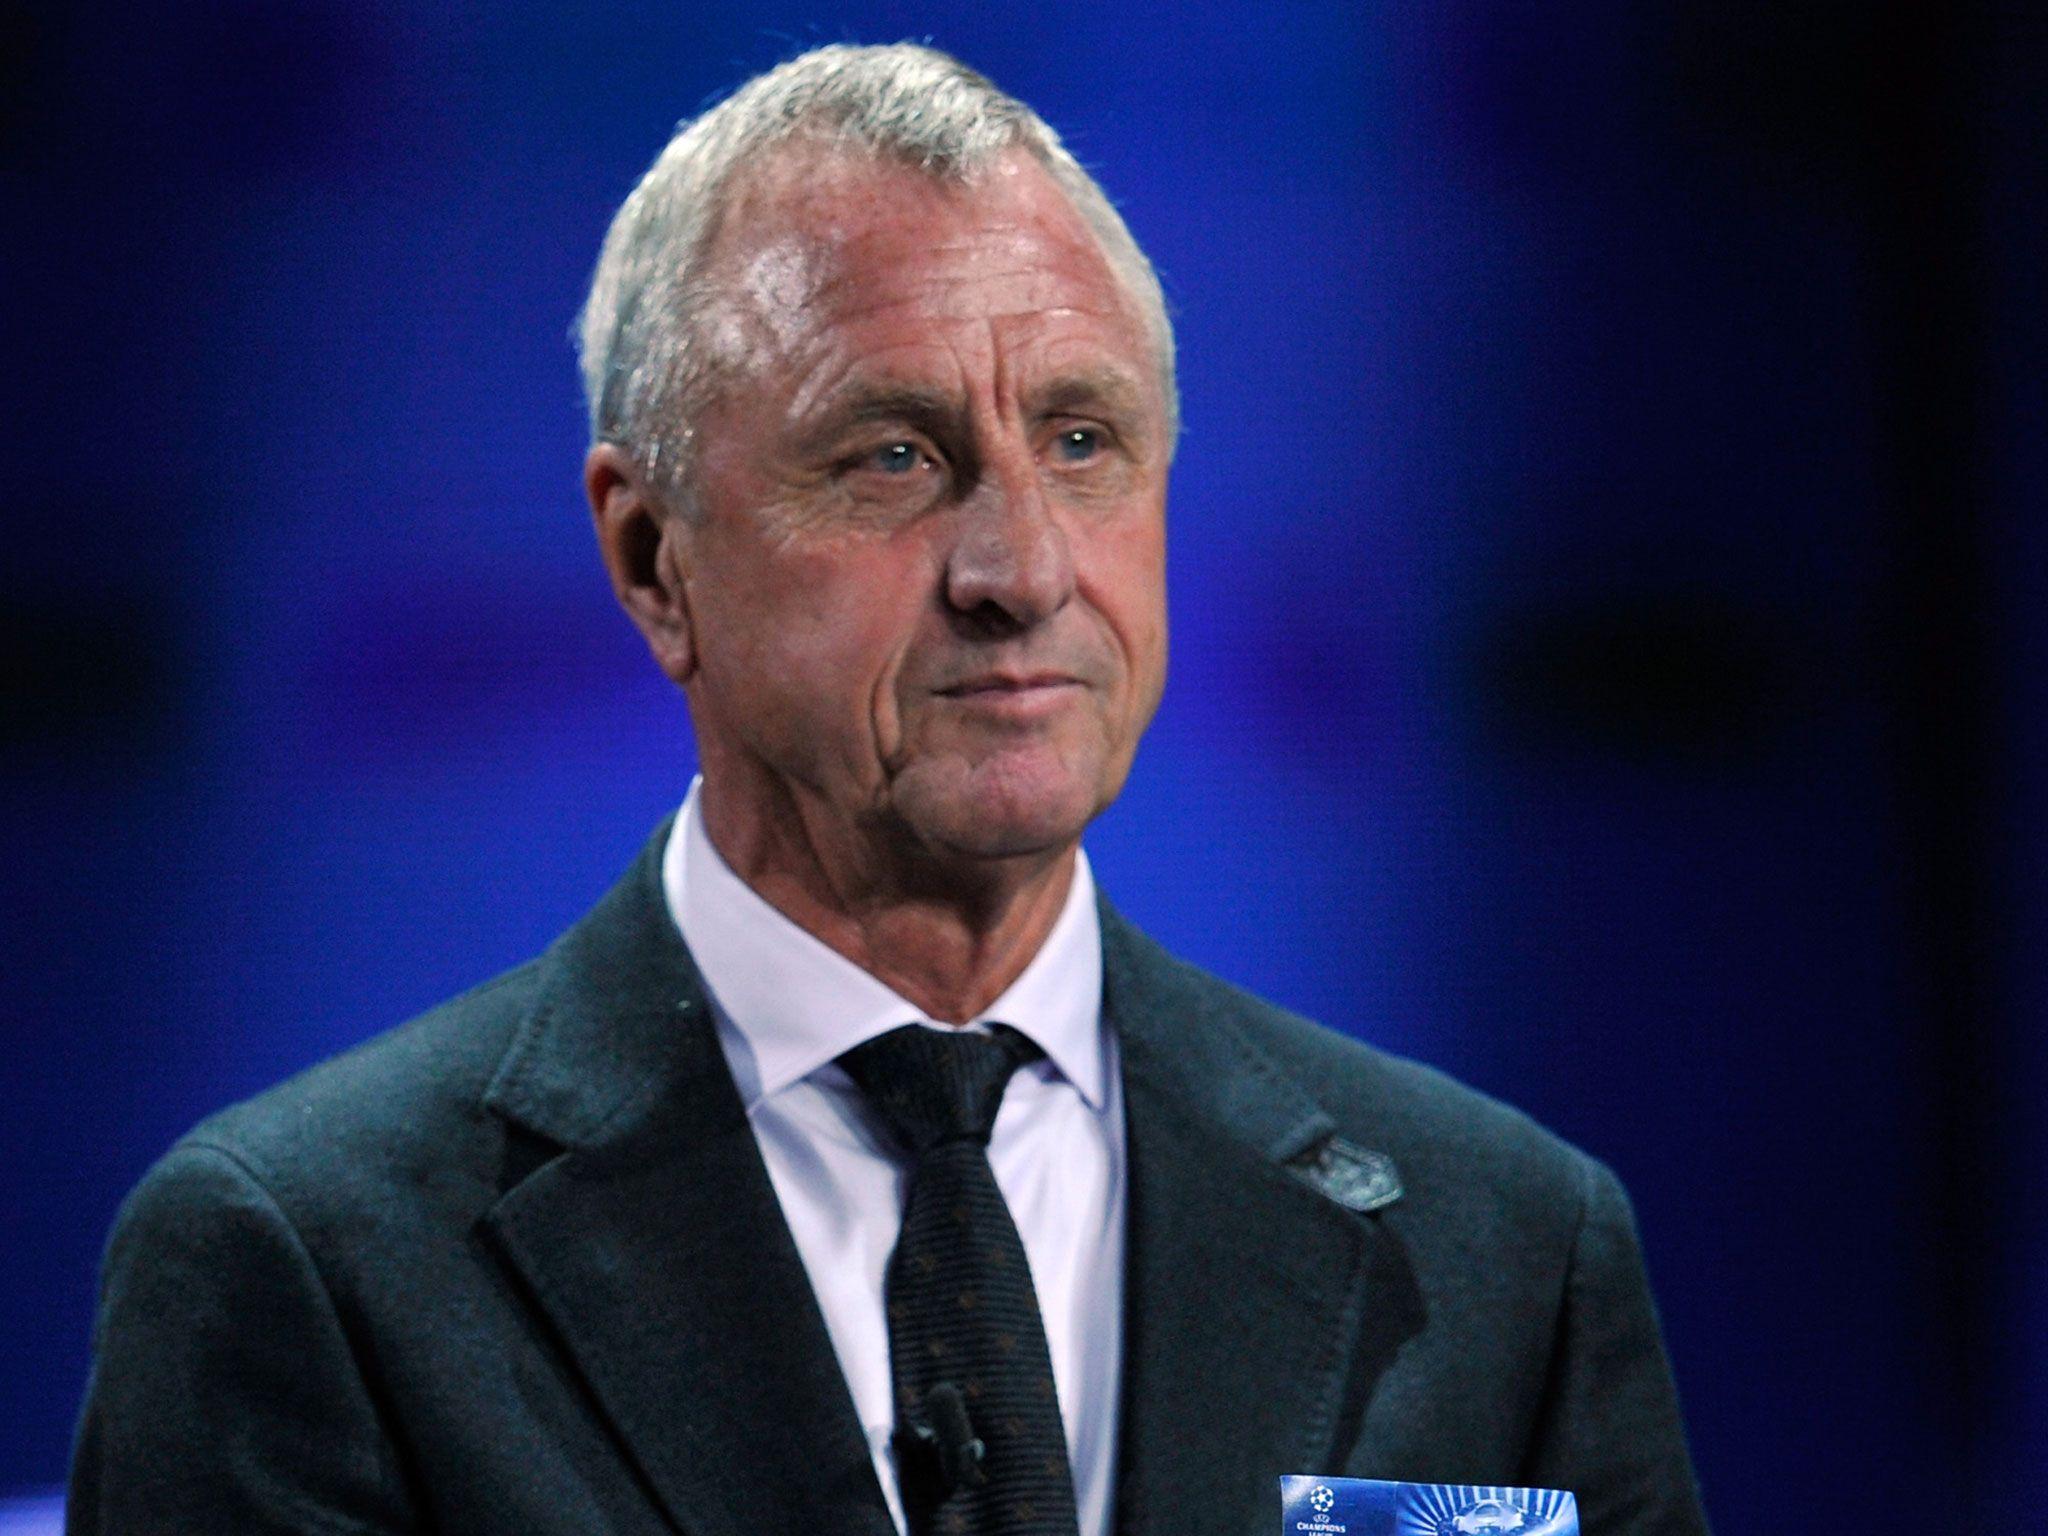 Barcelona legend Johan Cruyff reveals ‘disappointment’ that lung